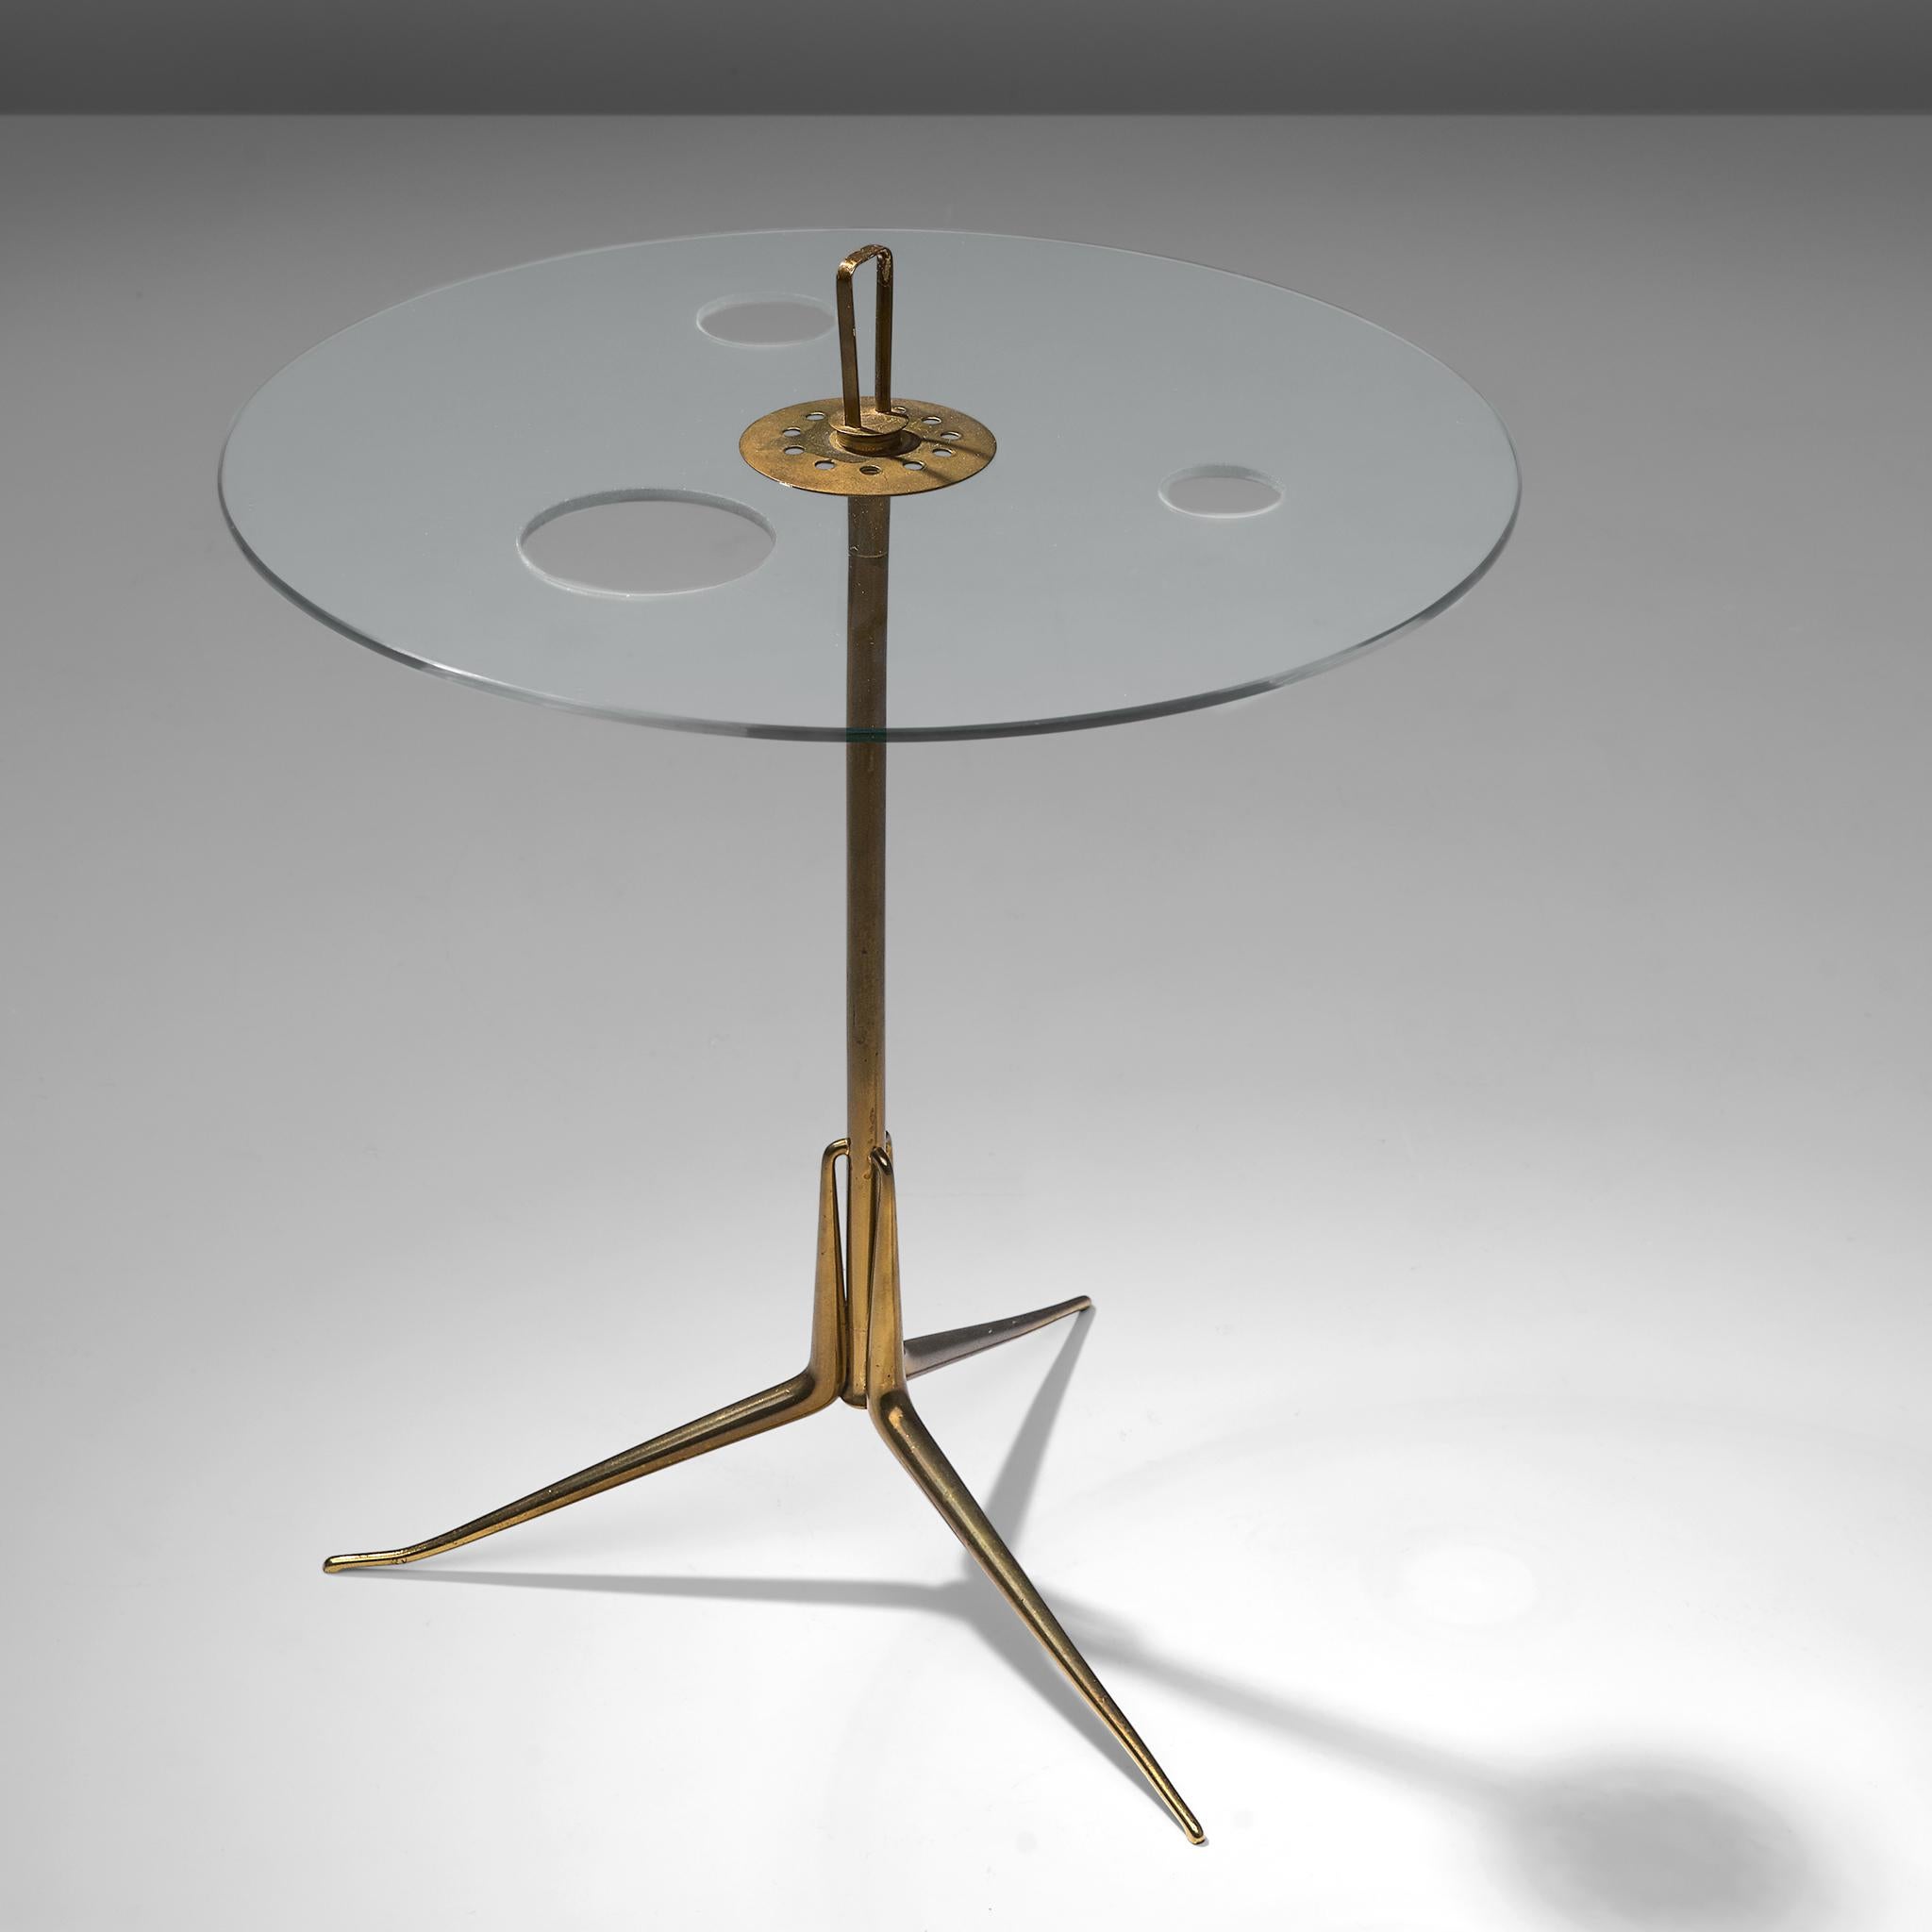 Arteluce, side table, glass and brass, Italy, 1950s

Arteluce brass and glass serving stand - An adjustable variation of this model Arteluce table was featured in the landmark exhibition 